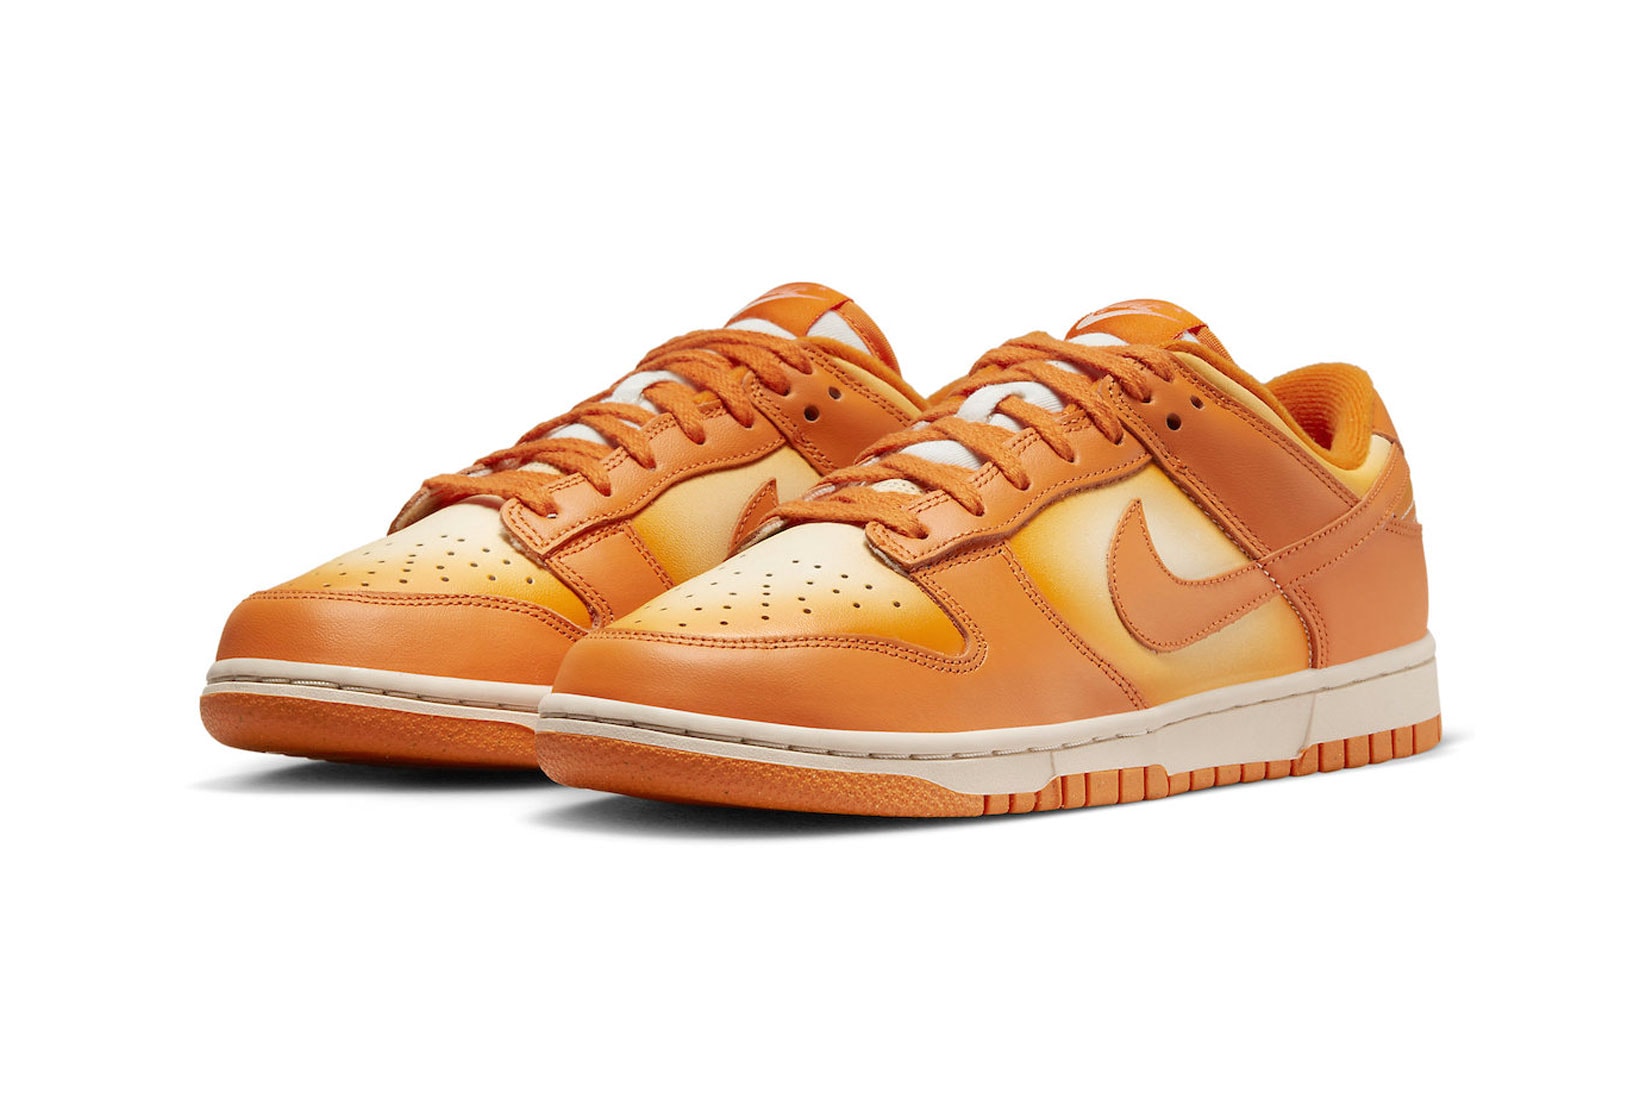 Nike Dunk Low Women's "Magma Orange" Release Restock Images Where to buy